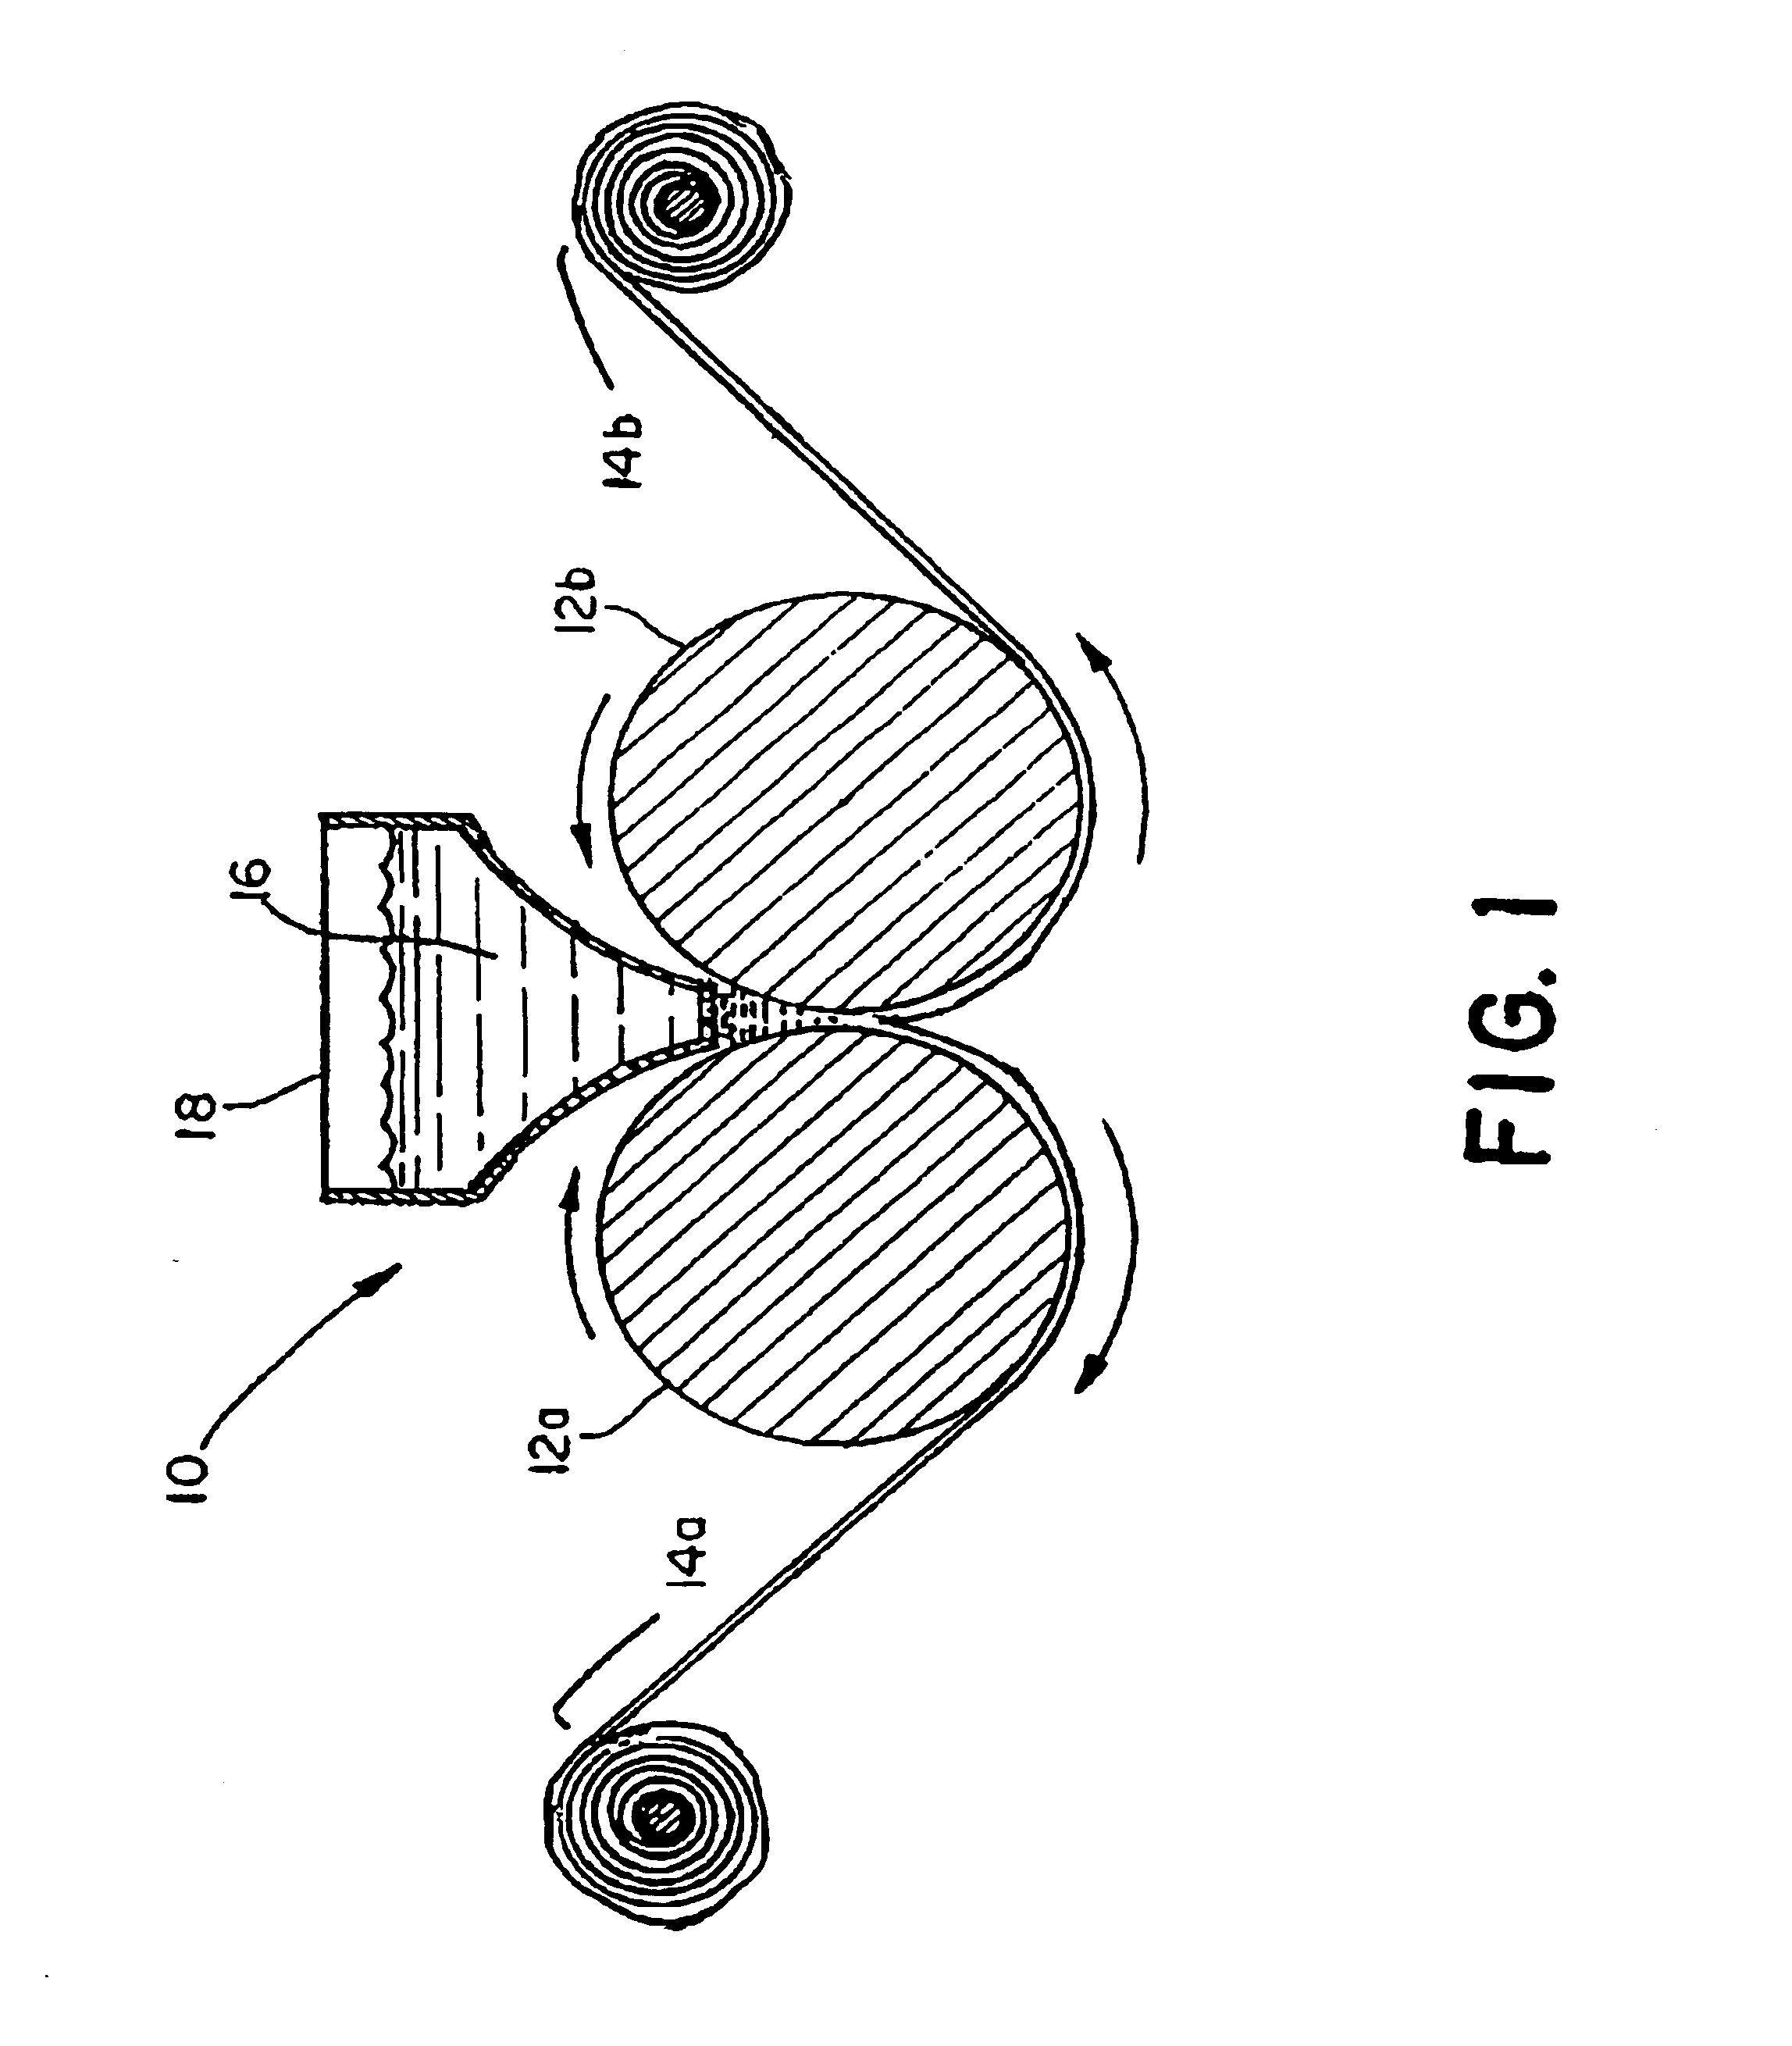 Method of producing edible cellulosic films